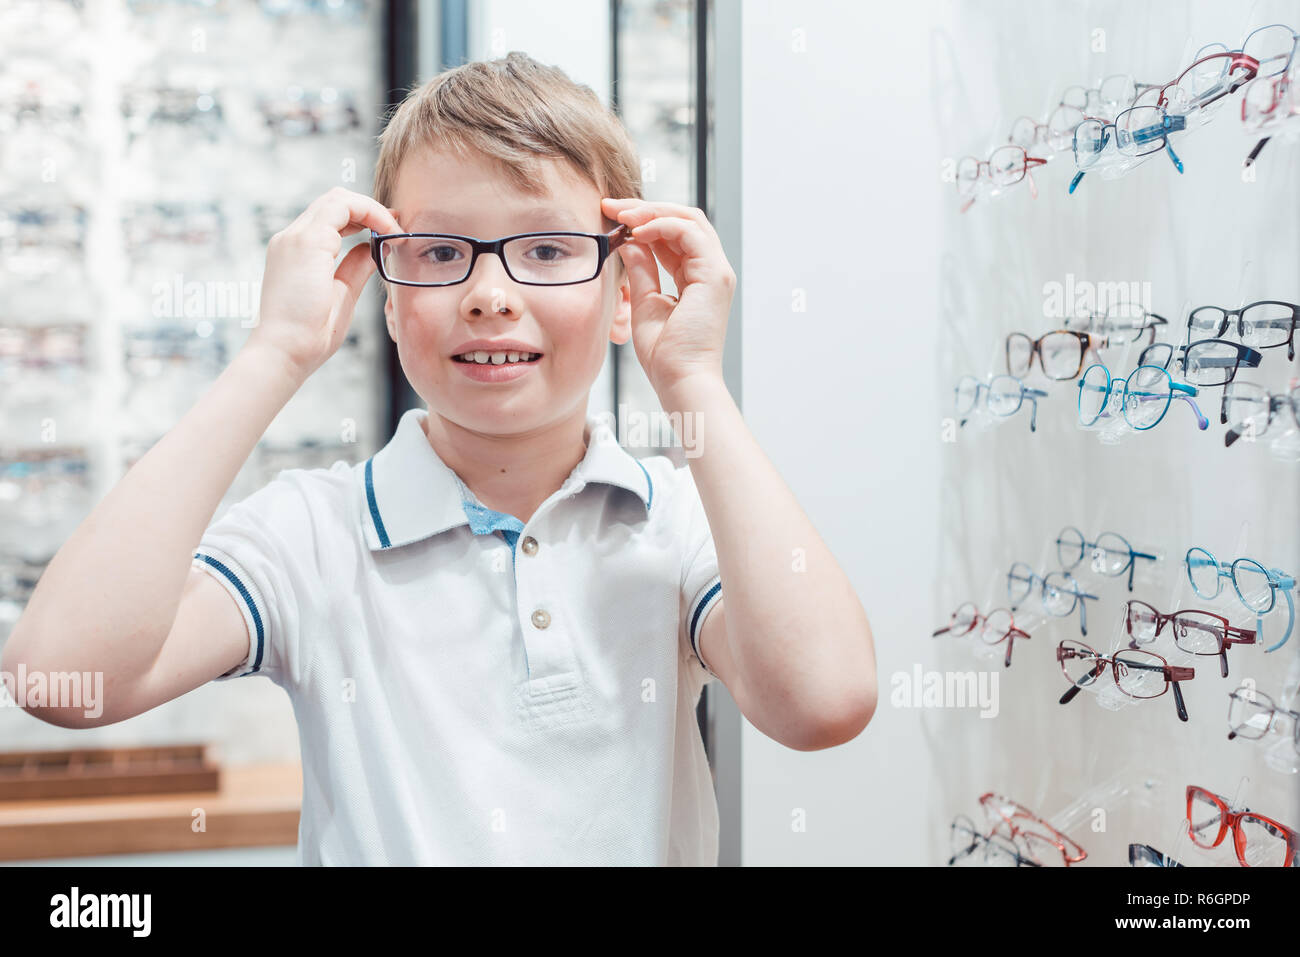 Young boy being very happy with his new eyeglasses in the store Stock Photo